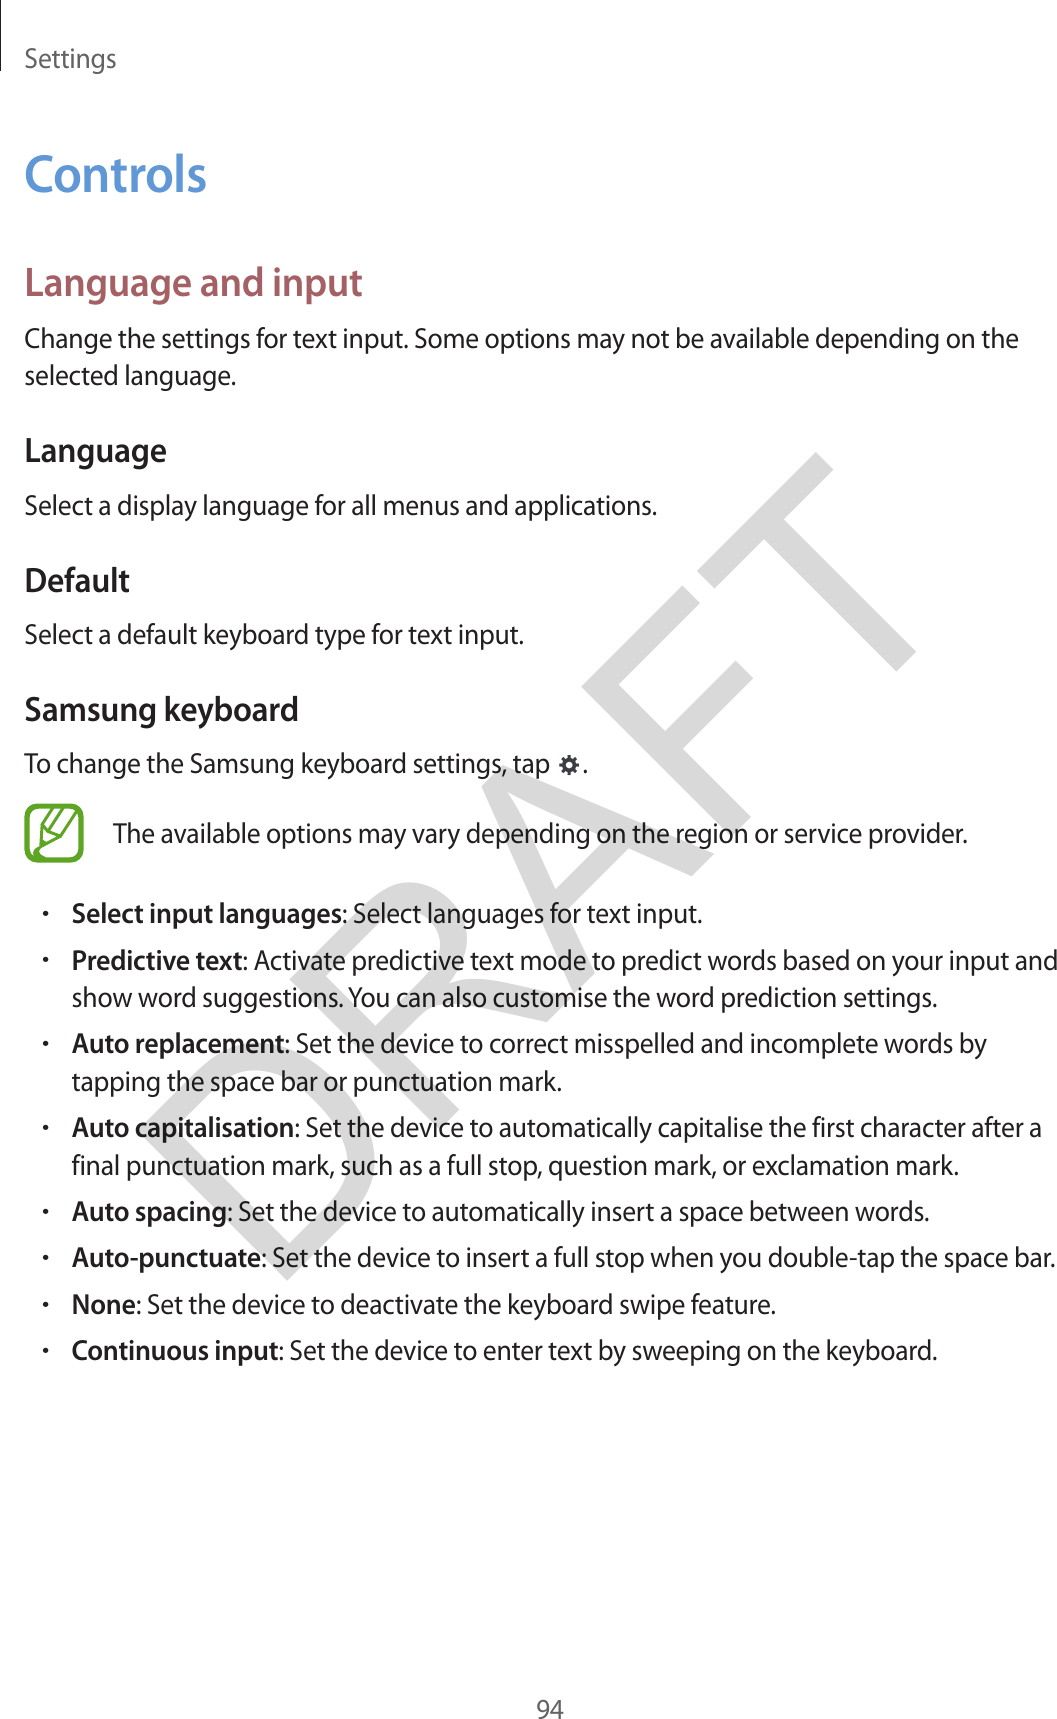 Settings94ControlsLanguage and inputChange the settings for text input. Some options may not be available depending on the selected language.LanguageSelect a display language for all menus and applications.DefaultSelect a default keyboard type for text input.Samsung keyboardTo change the Samsung keyboard settings, tap  .The available options may vary depending on the region or service provider.•Select input languages: Select languages for text input.•Predictive text: Activate predictive text mode to predict words based on your input andshow word suggestions. You can also customise the word prediction settings.•Auto replacement: Set the device to correct misspelled and incomplete words bytapping the space bar or punctuation mark.•Auto capitalisation: Set the device to automatically capitalise the first character after afinal punctuation mark, such as a full stop, question mark, or exclamation mark.•Auto spacing: Set the device to automatically insert a space between words.•Auto-punctuate: Set the device to insert a full stop when you double-tap the space bar.•None: Set the device to deactivate the keyboard swipe feature.•Continuous input: Set the device to enter text by sweeping on the keyboard.DRAFT